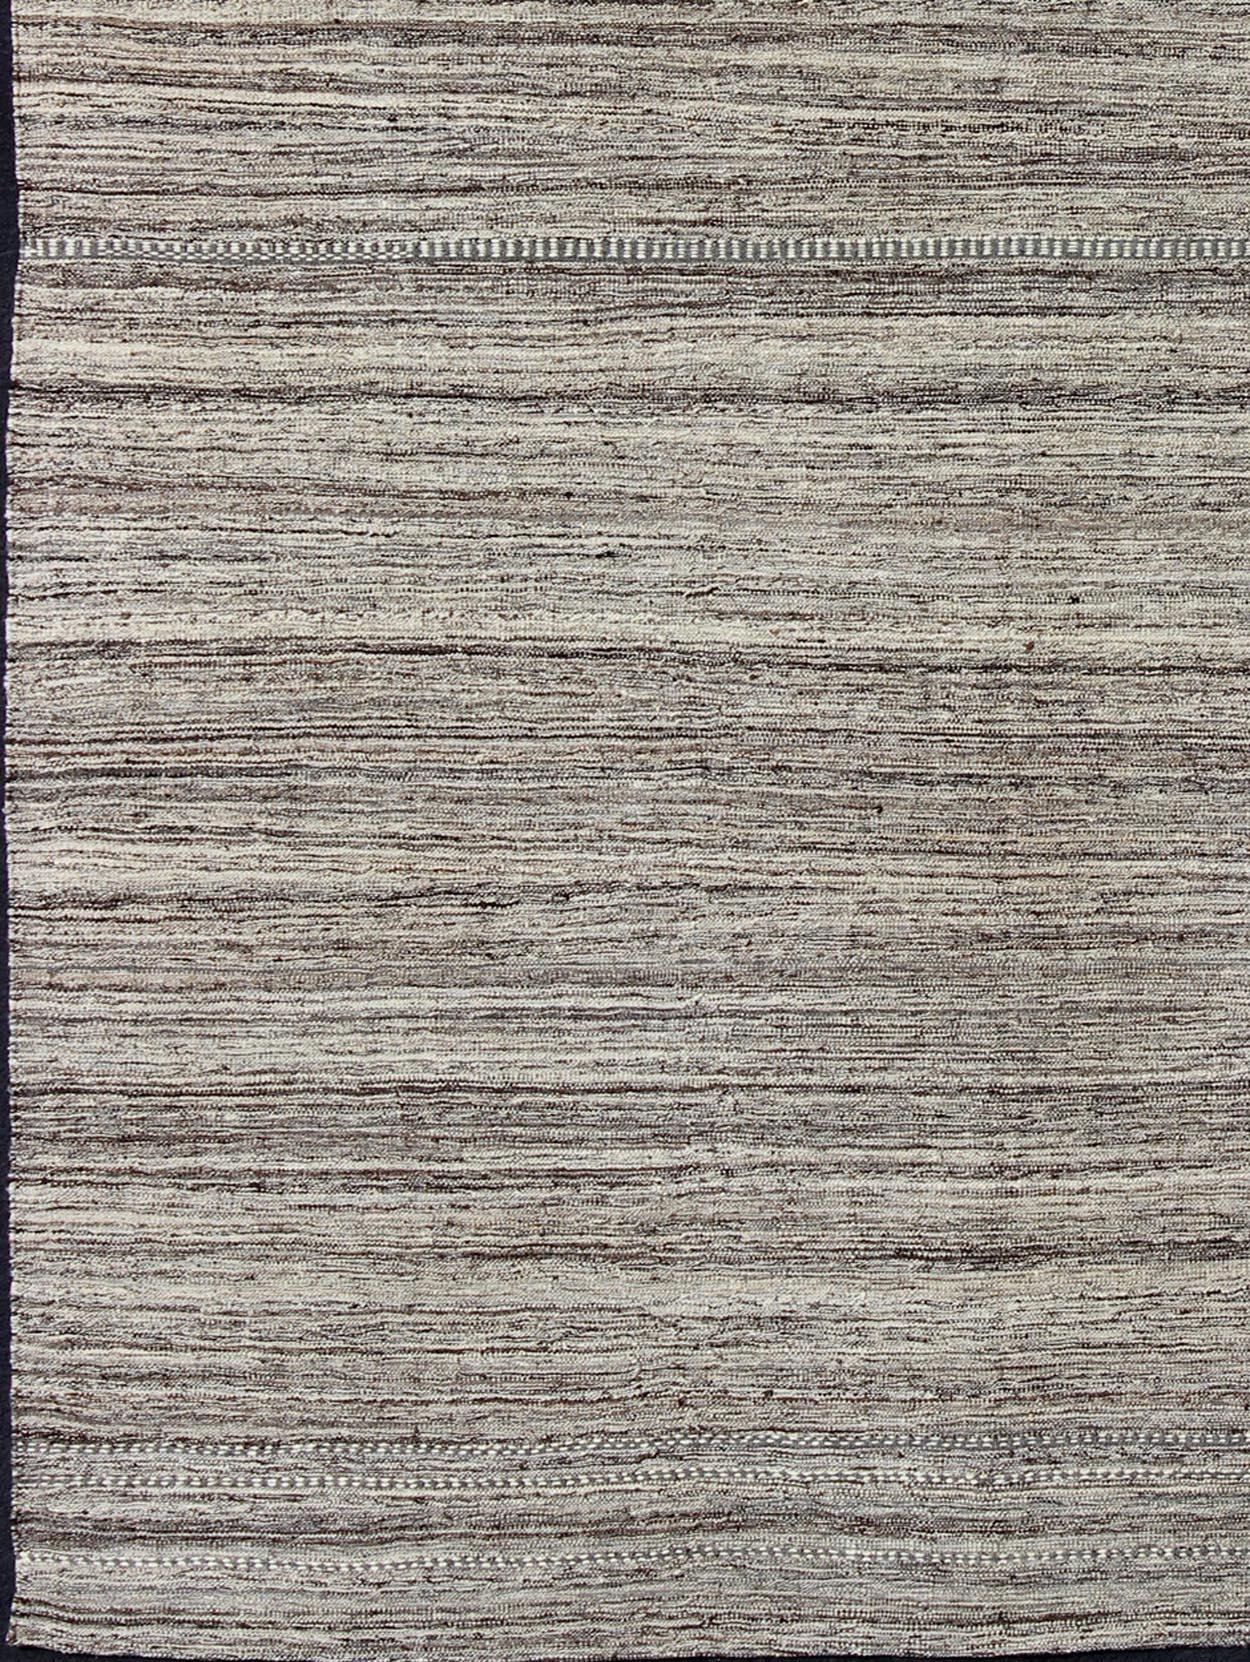 Versatile and natural color-tone flat-weave Kilim for a Modern or Classic design
Flat-weave Kilim rug with natural tones, rug afg-21361, country of origin / type: Afghanistan / Kilim

This neutral colored piece features a design that evokes an easy